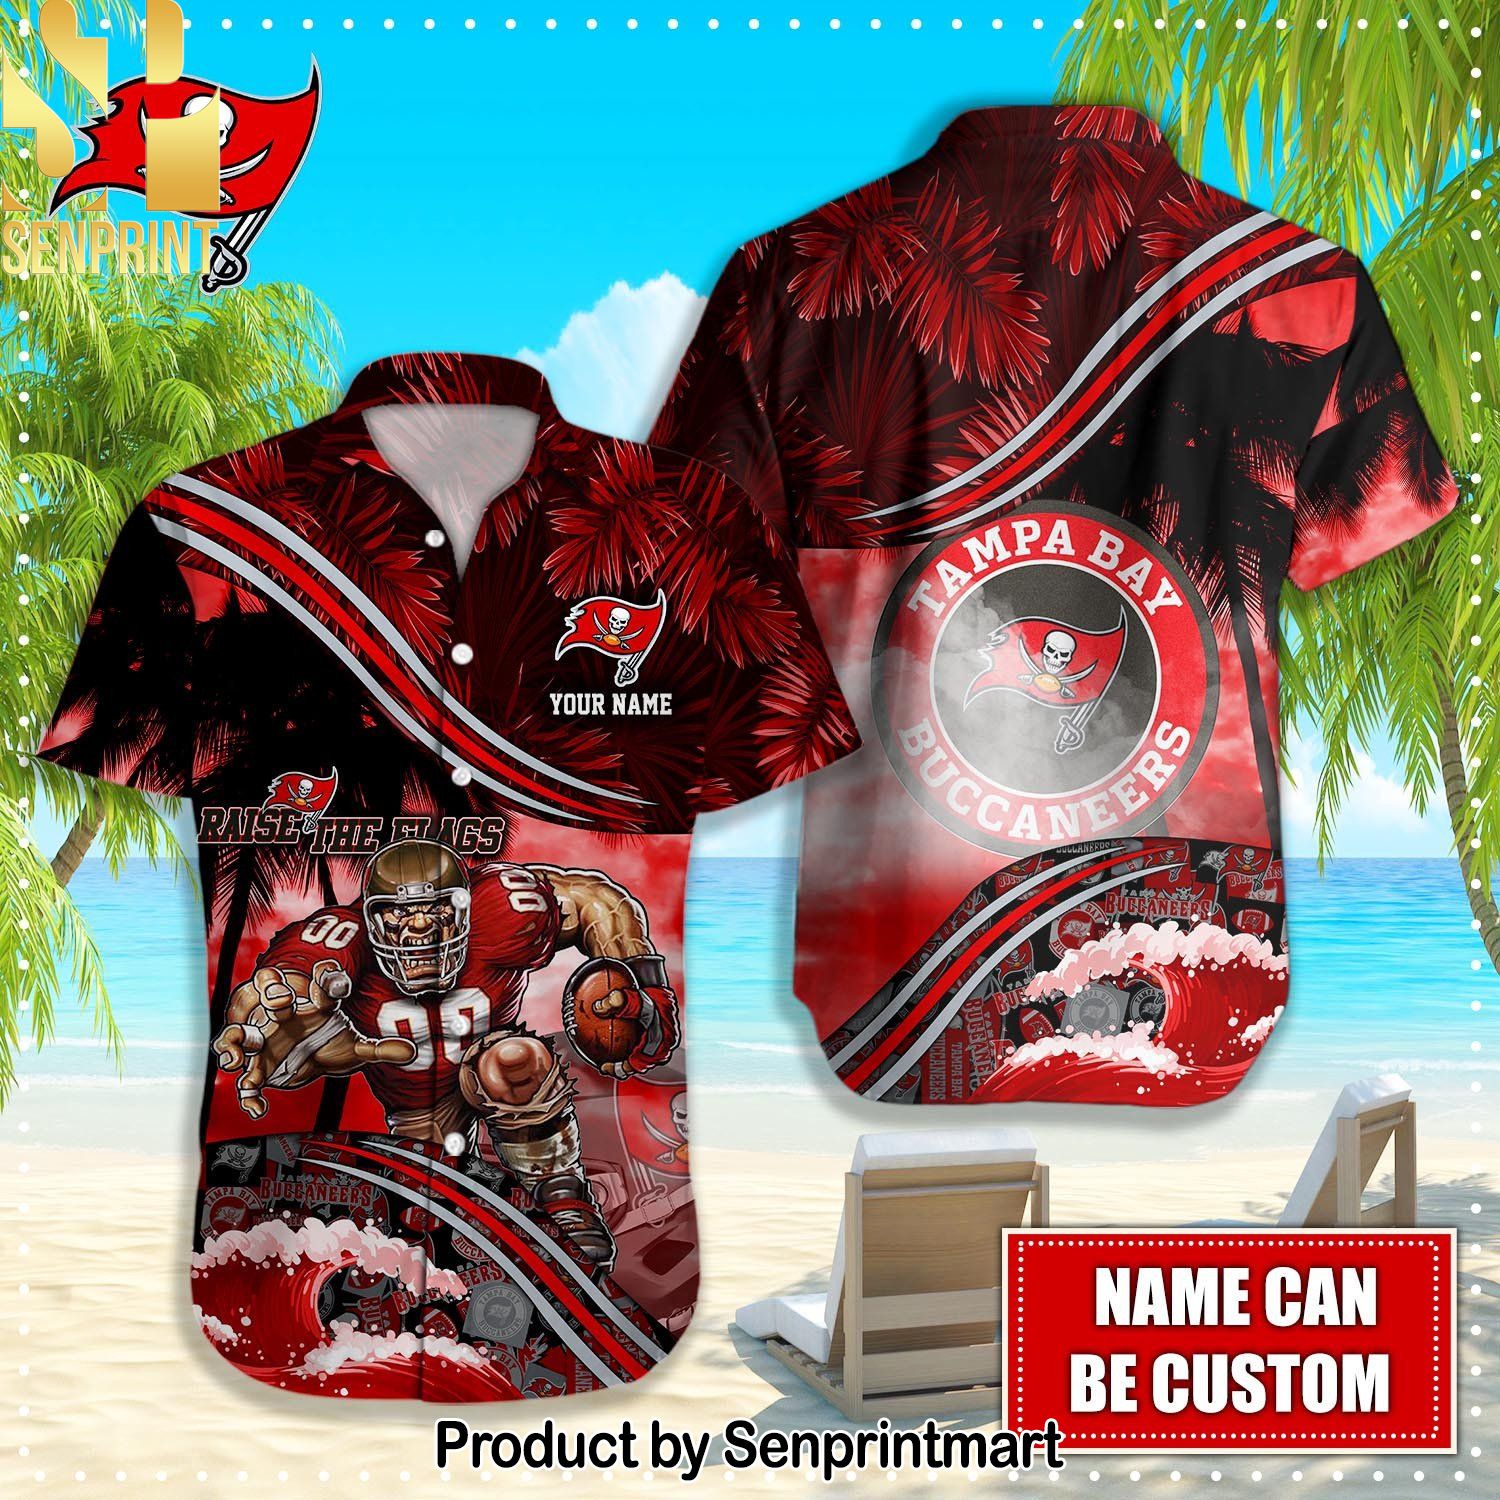 Tampa Bay Buccaneers NFL New Outfit Hawaiian Shirt and Shorts